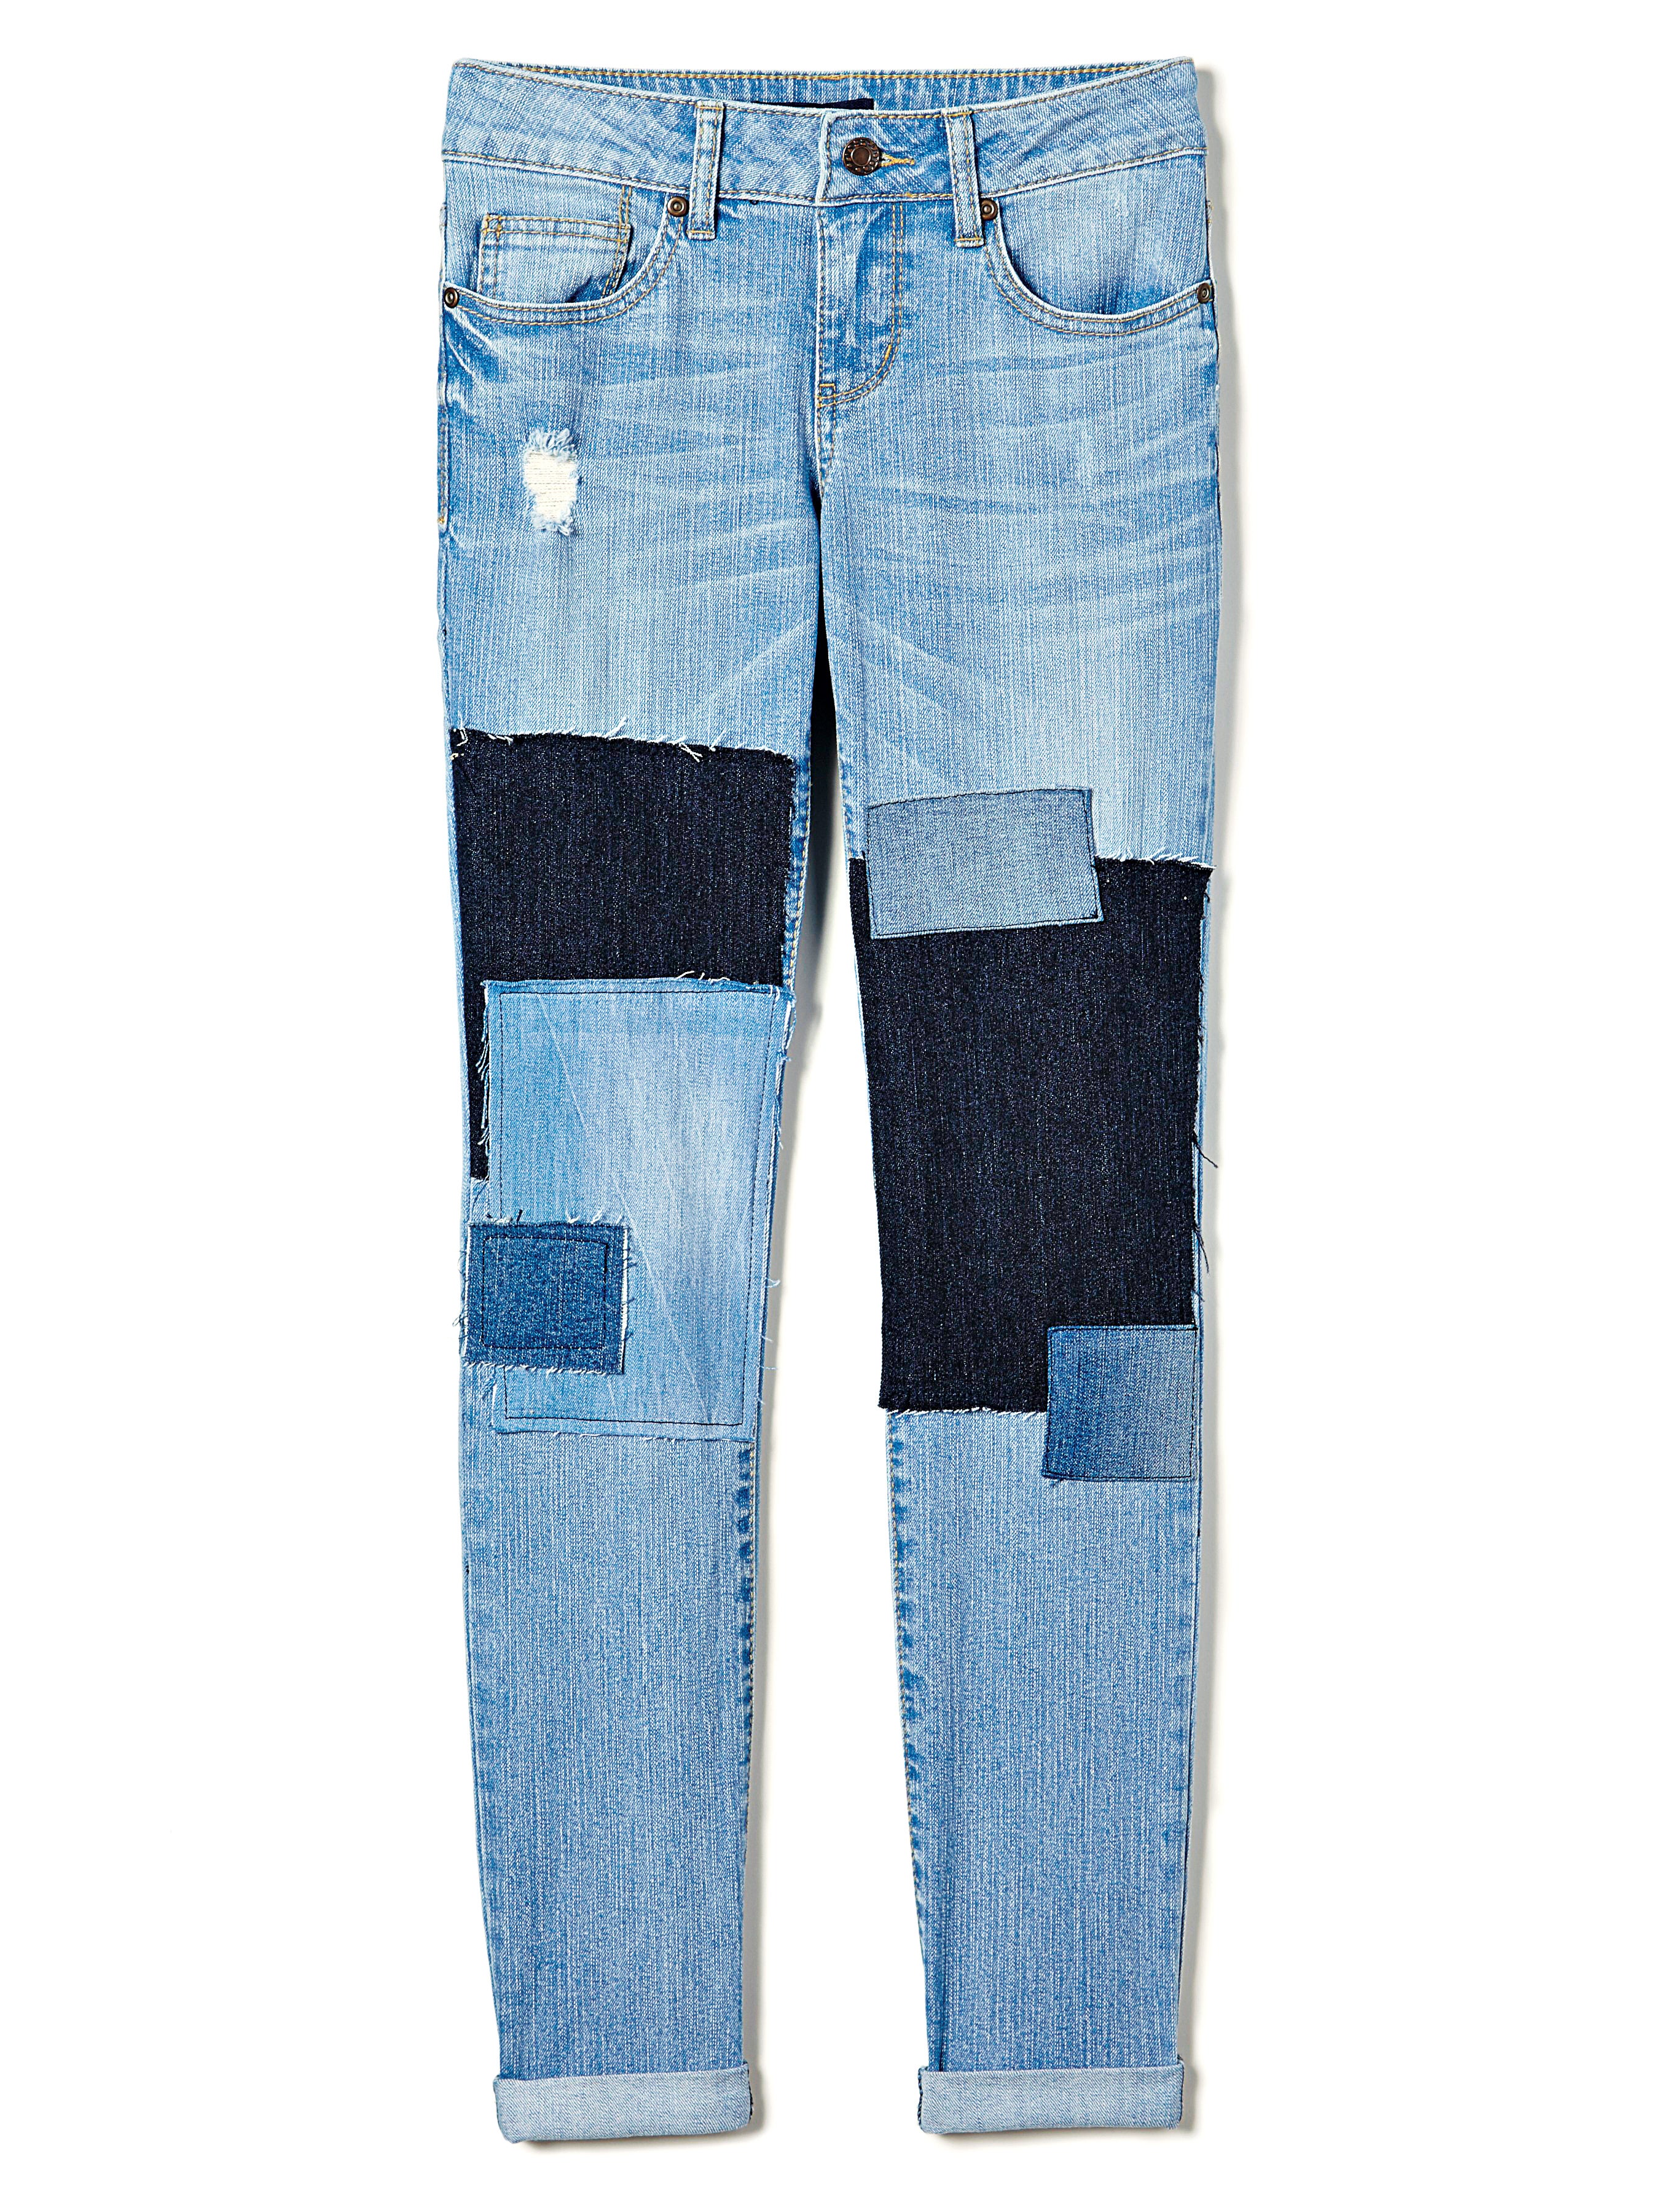 All About The Blues: ESSENCE's Denim Guide
